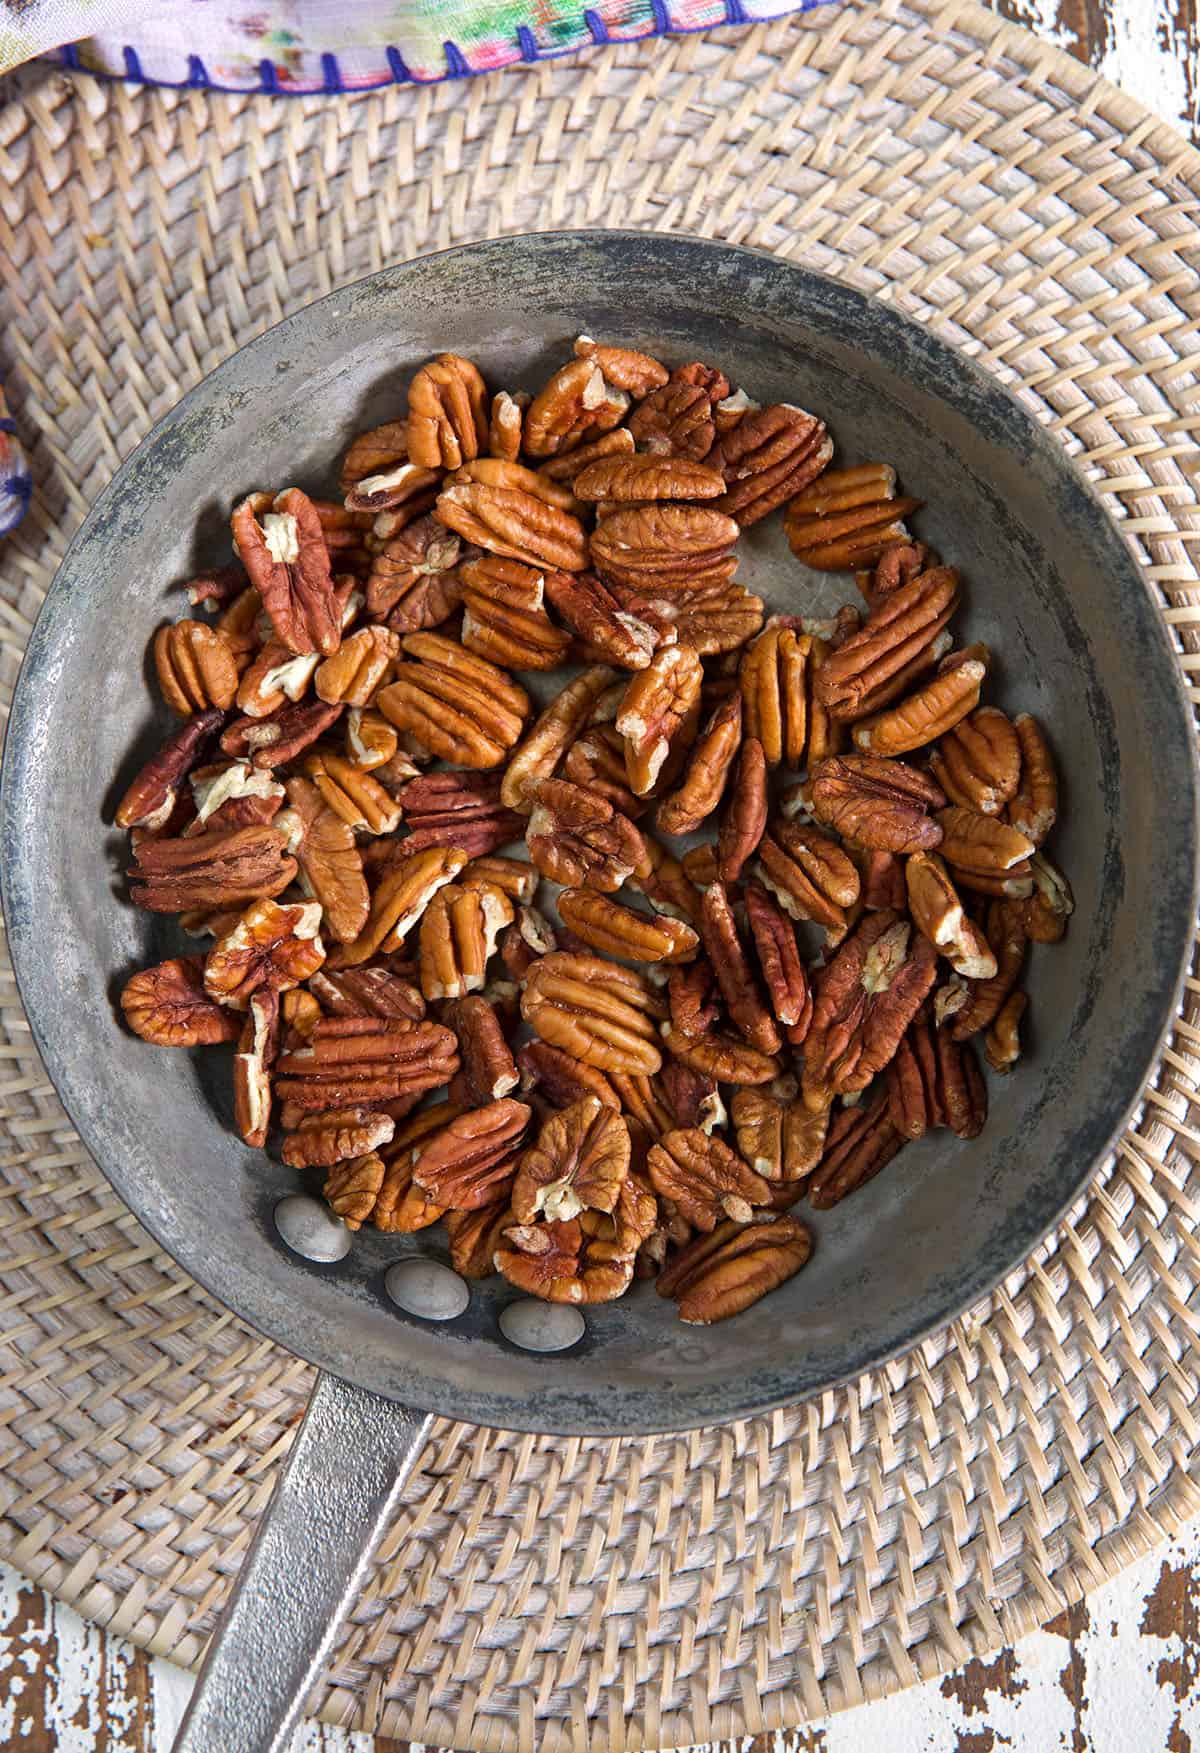 Pecans are toasted in a gray skillet.